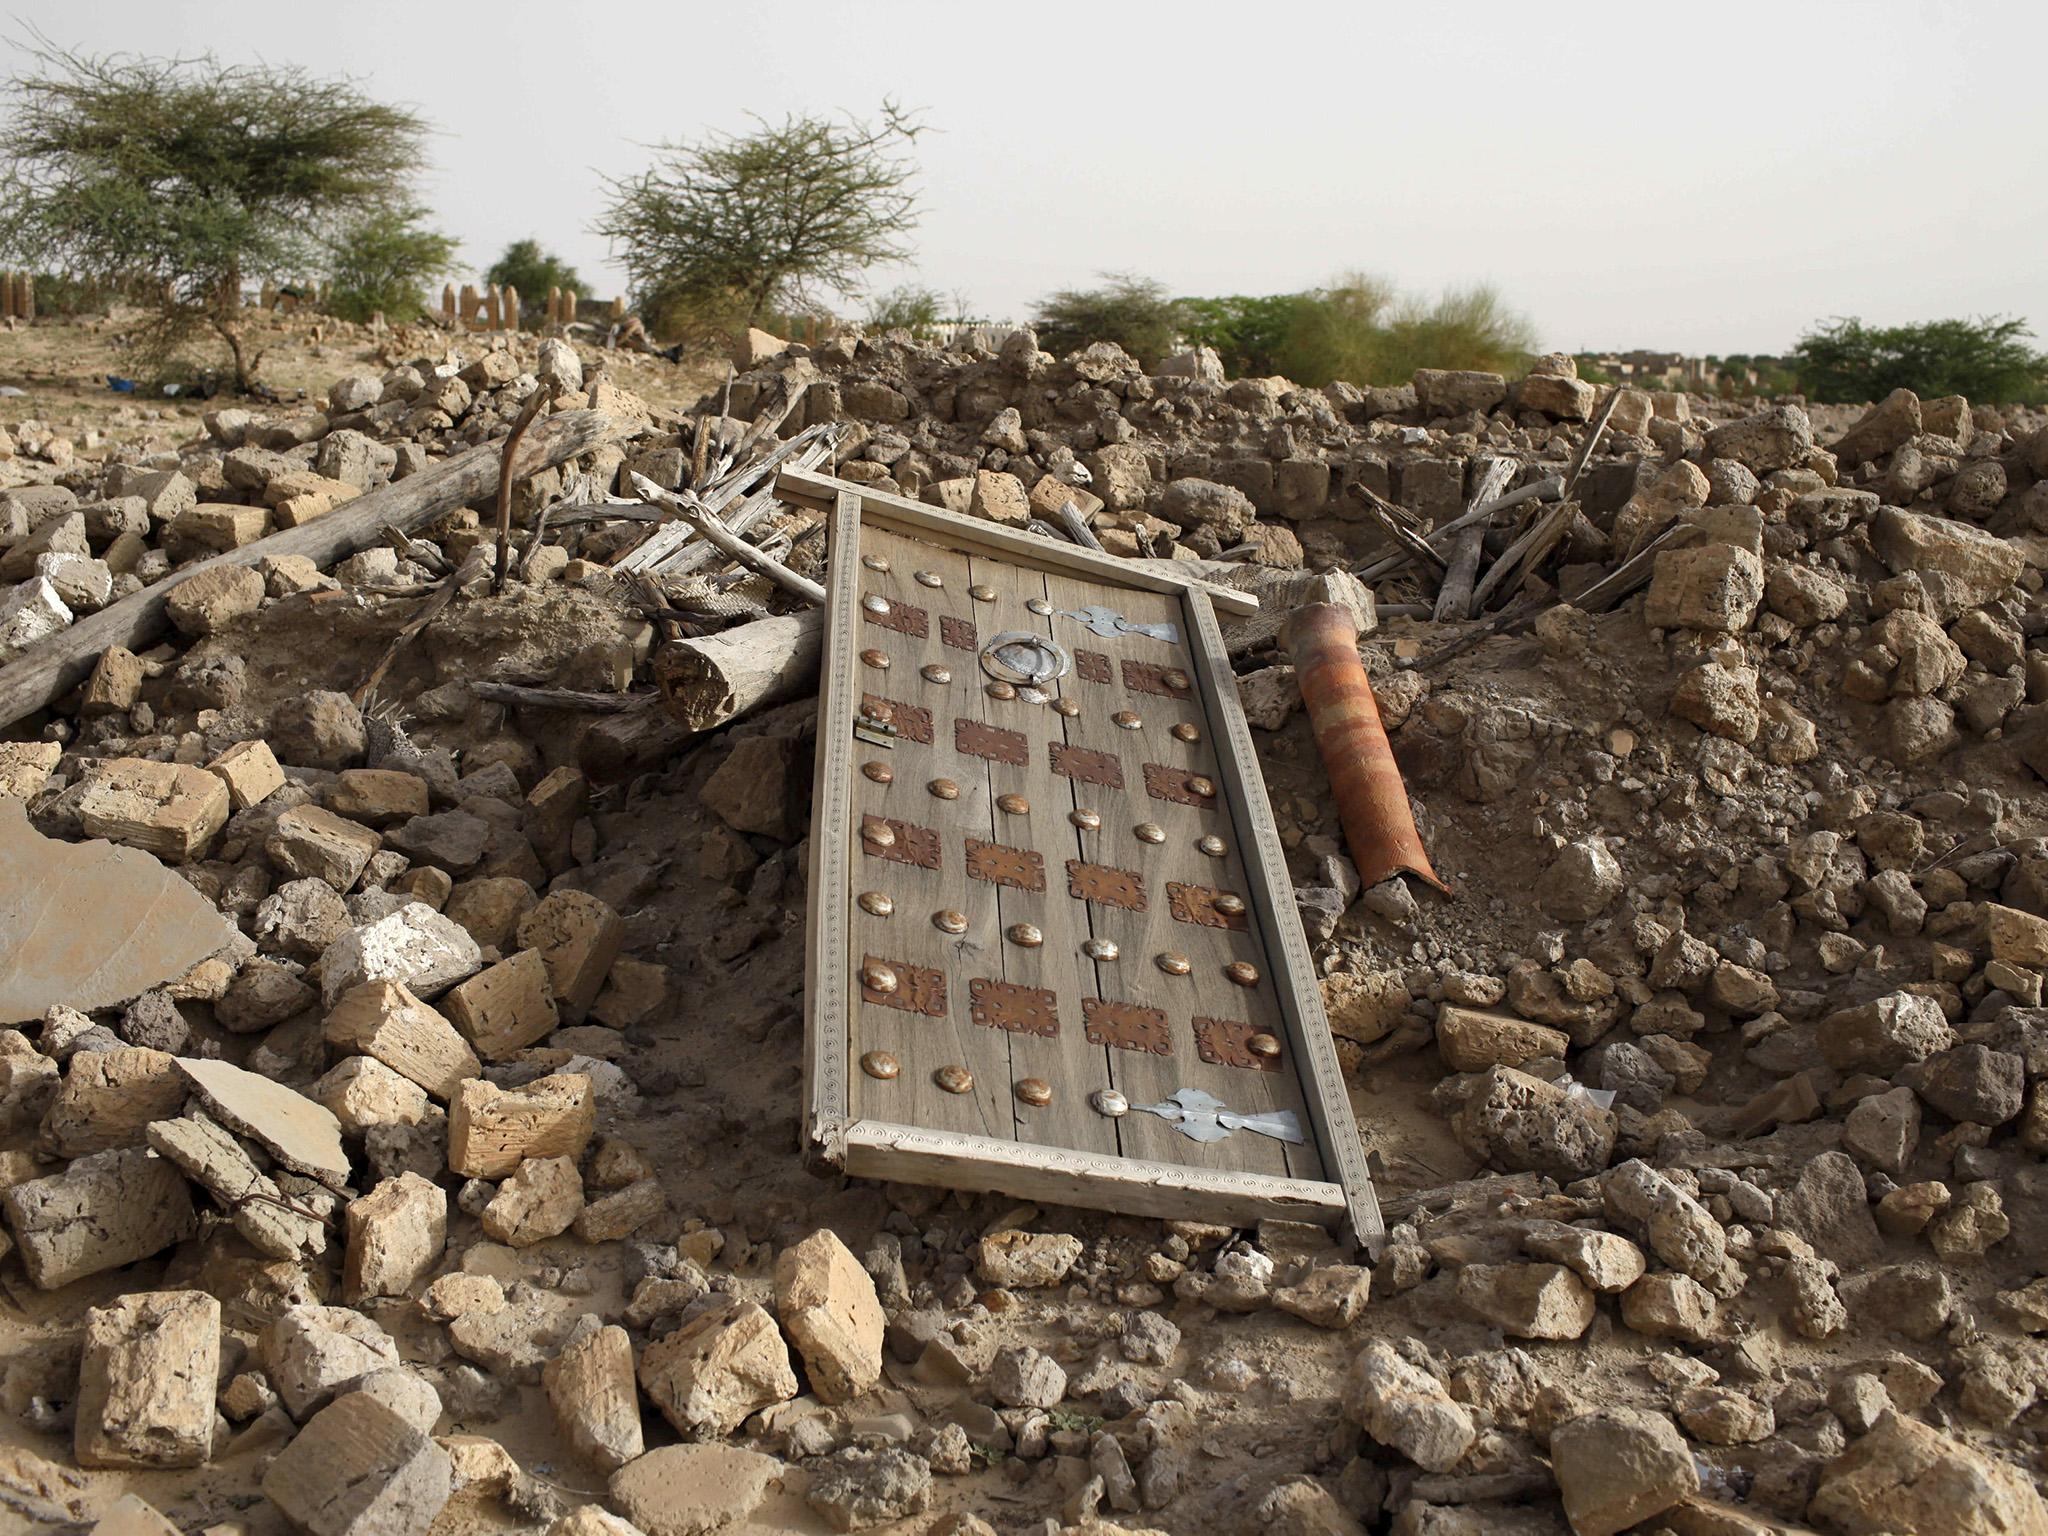 The rubble left from an ancient mausoleum destroyed by Islamist militants, is seen in Timbuktu, Mali